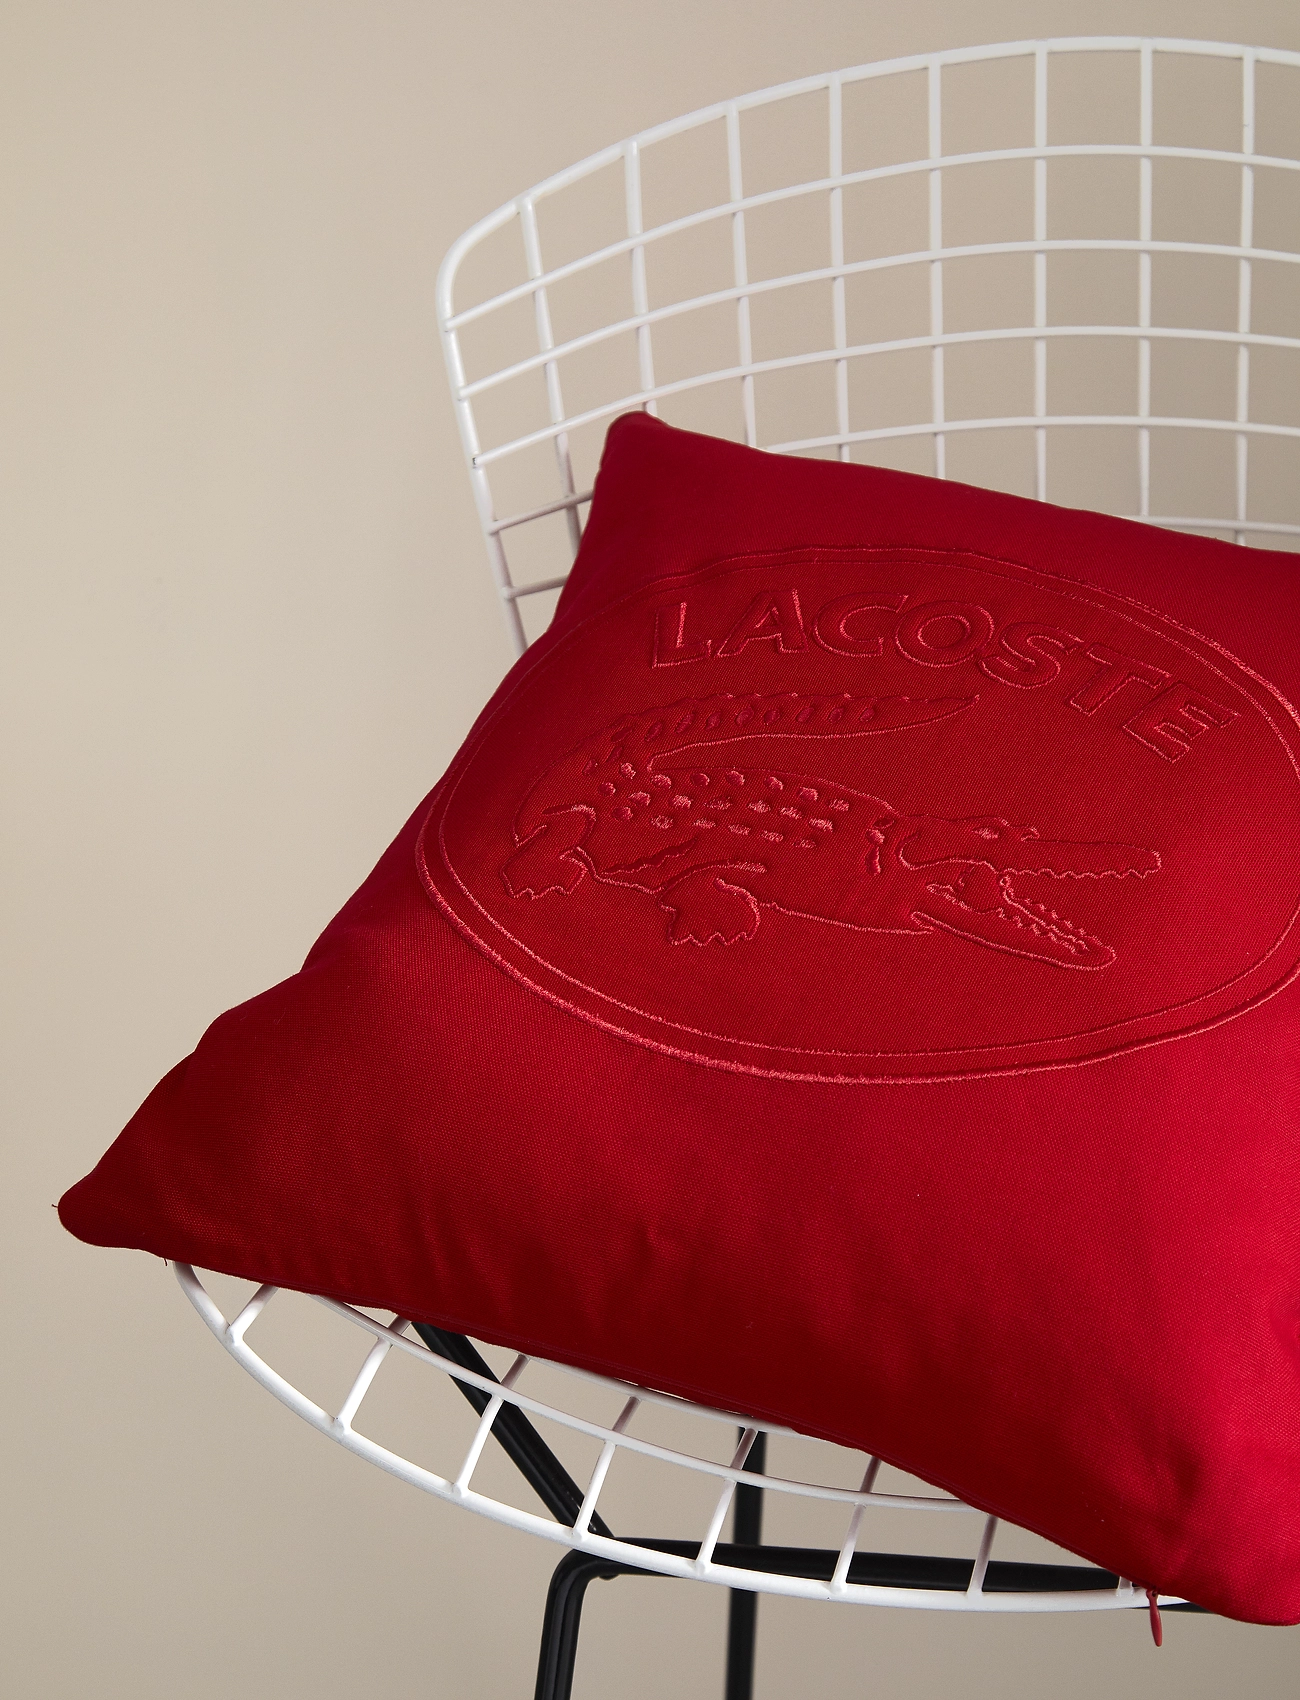 Lacoste Home - LLACOSTE Cushion cover - cushion covers - rouge - 1